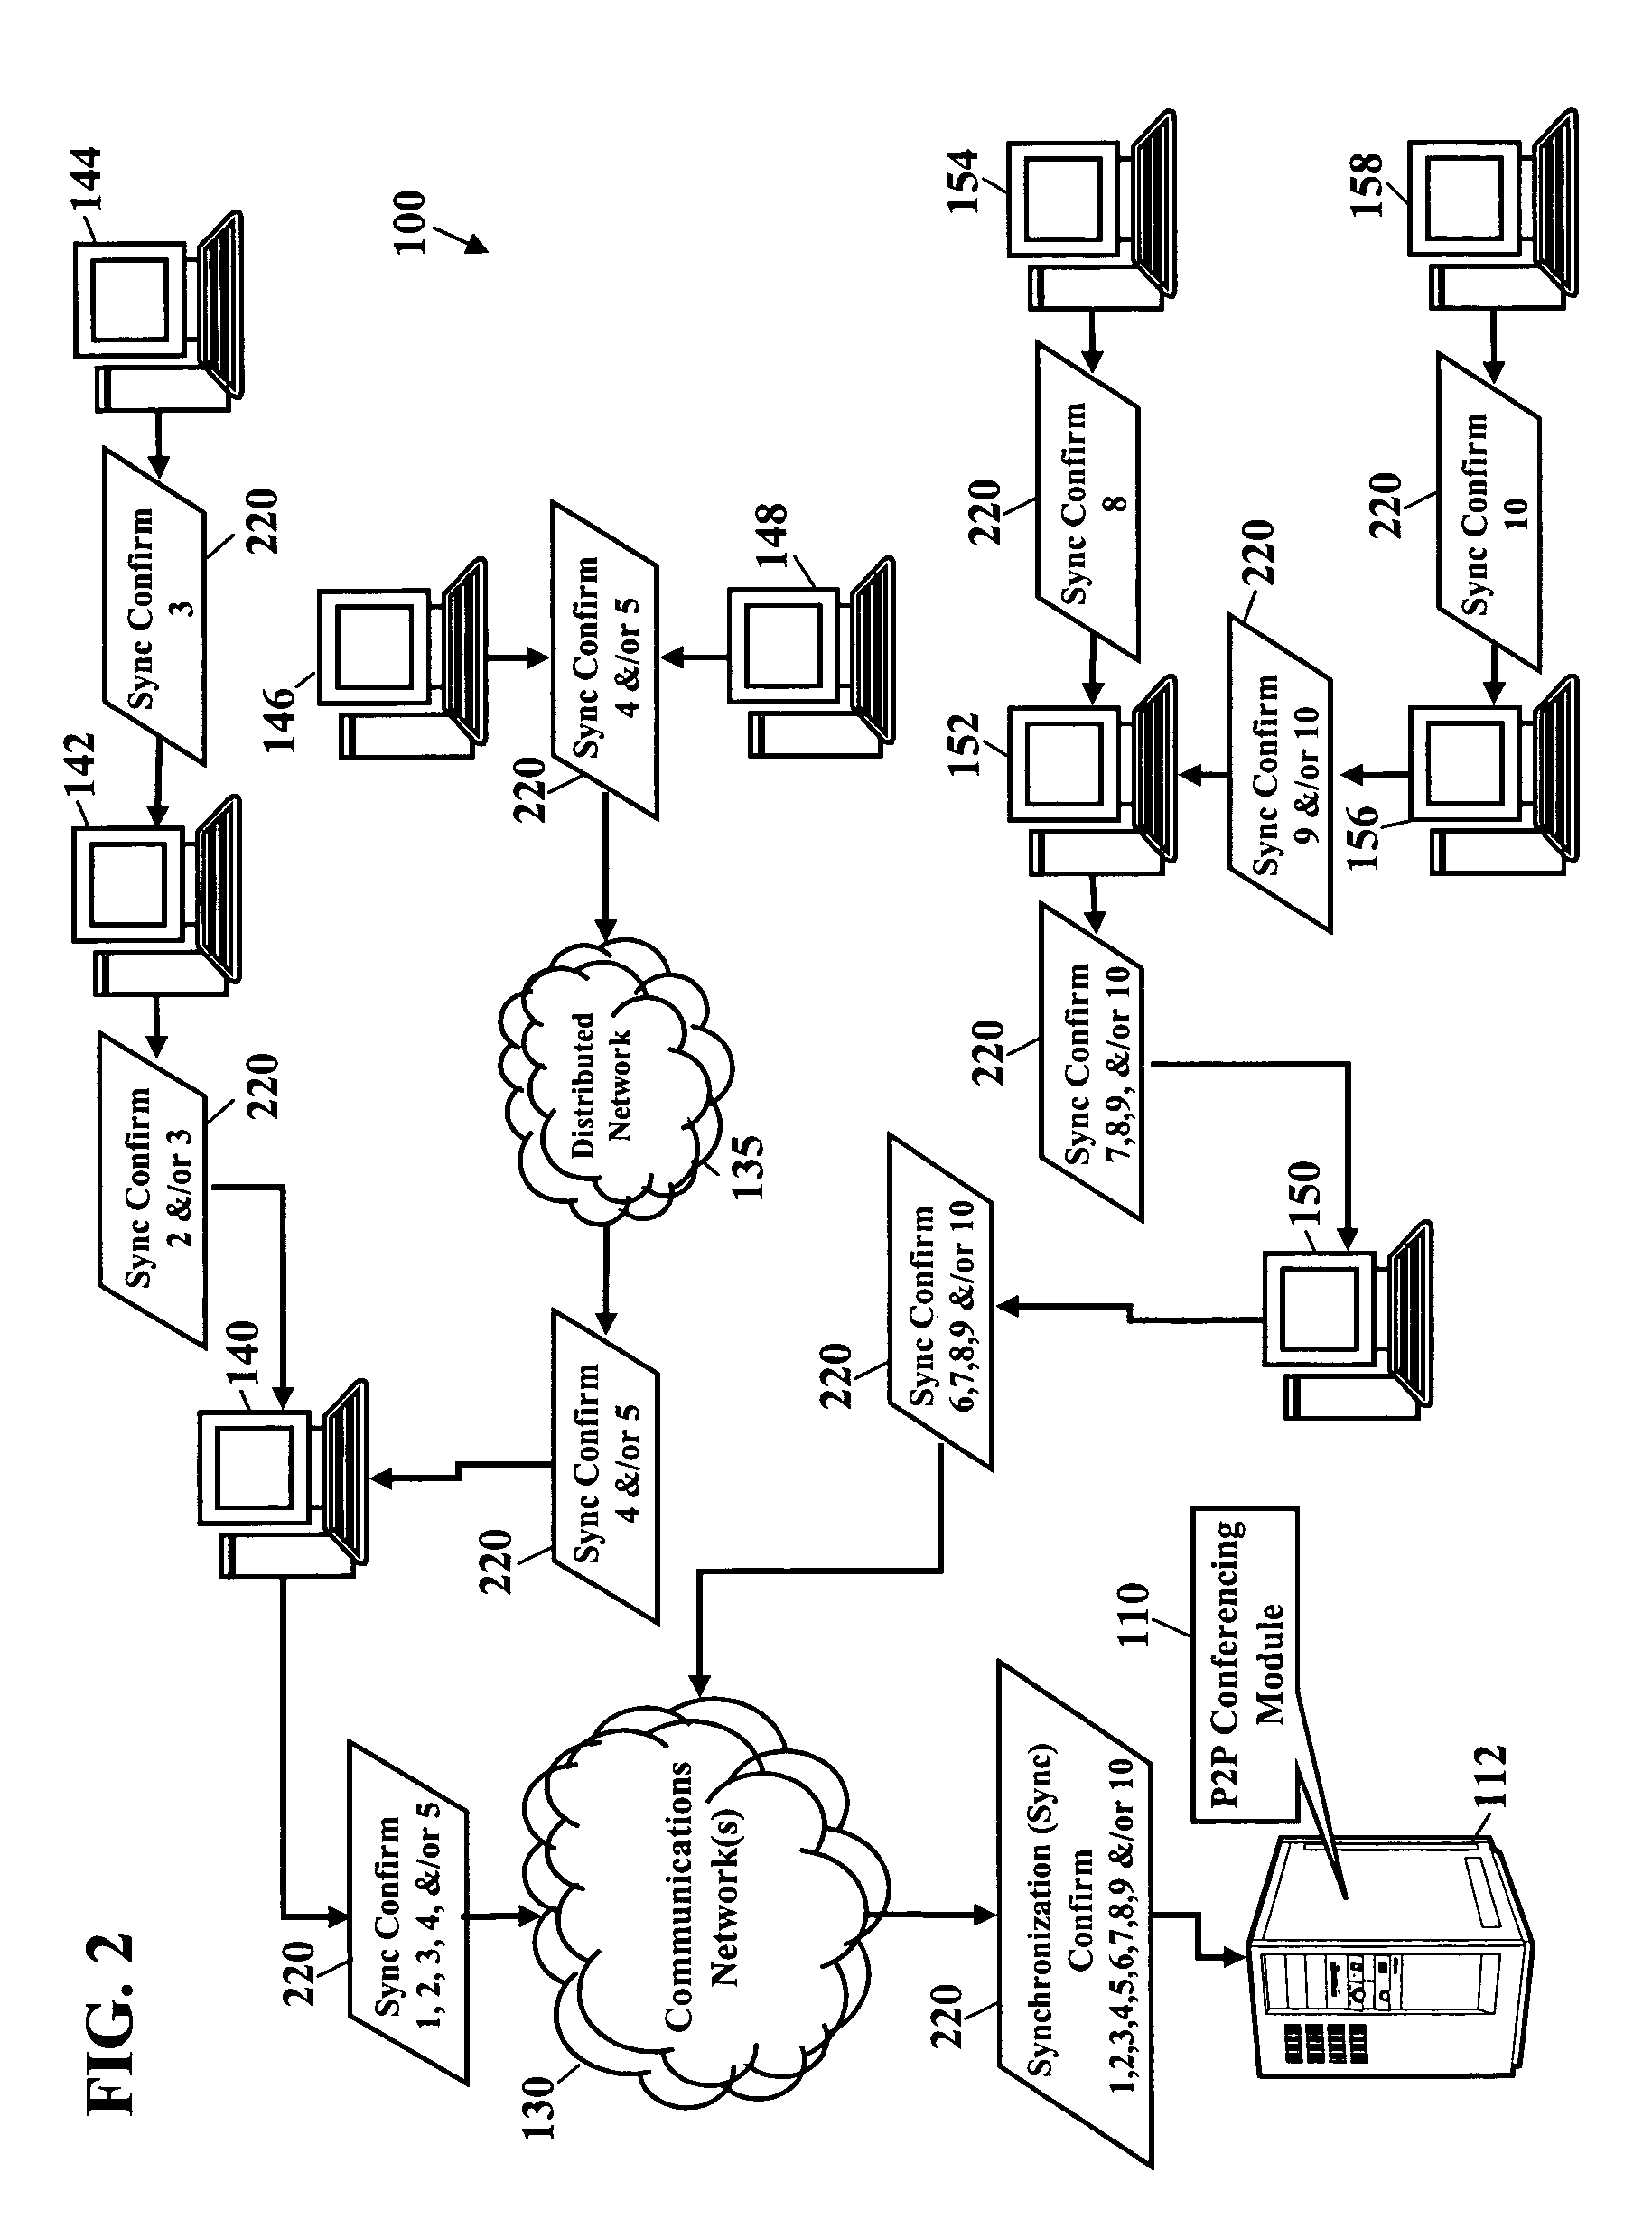 Network conferencing using method for distributed computing and/or distributed objects